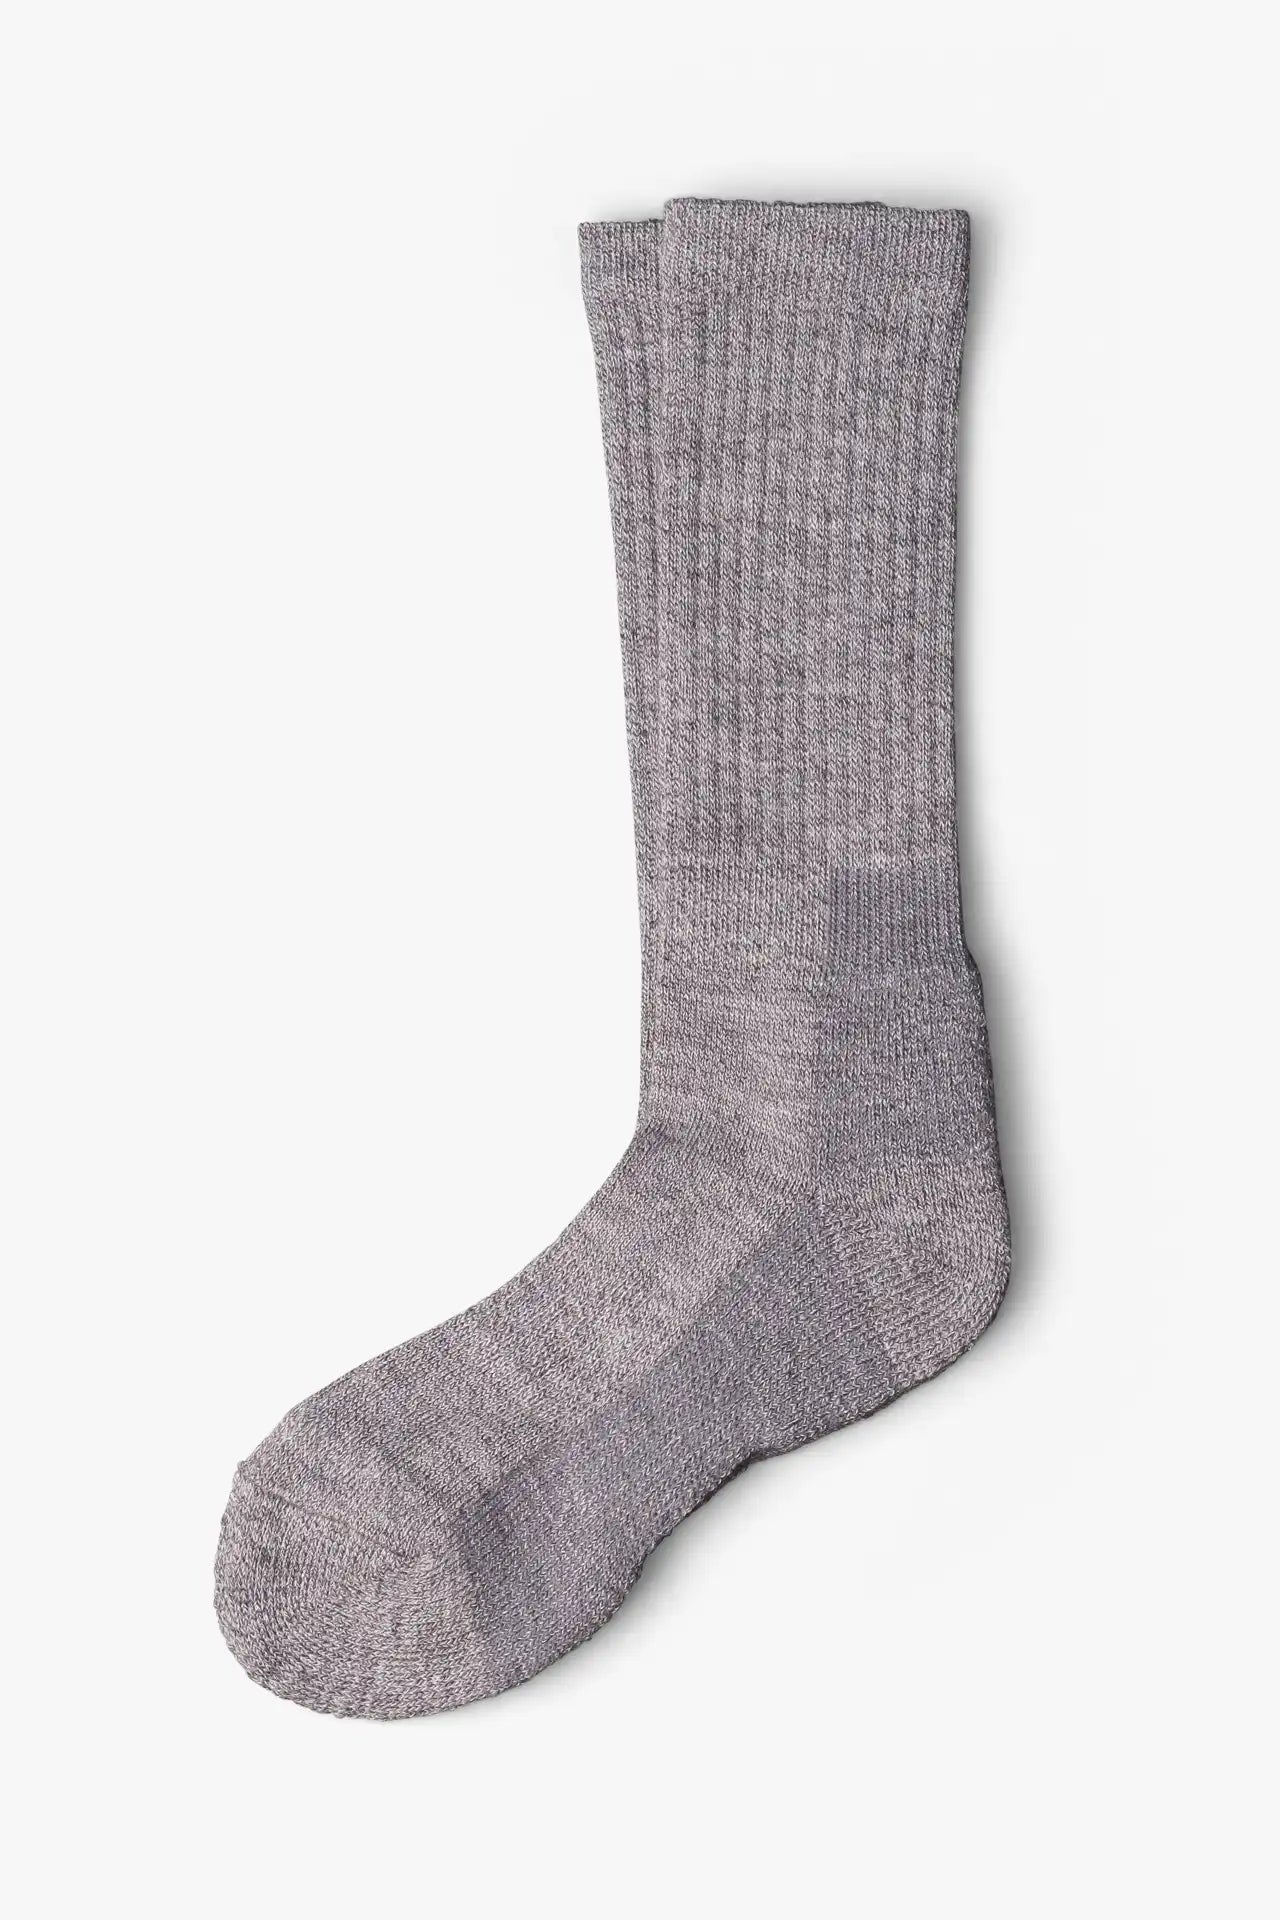 Gray casual boot sock in merino wool. Swedish design by once a day and produced by glenn clyde. Can we washed in warm water without shrinking.